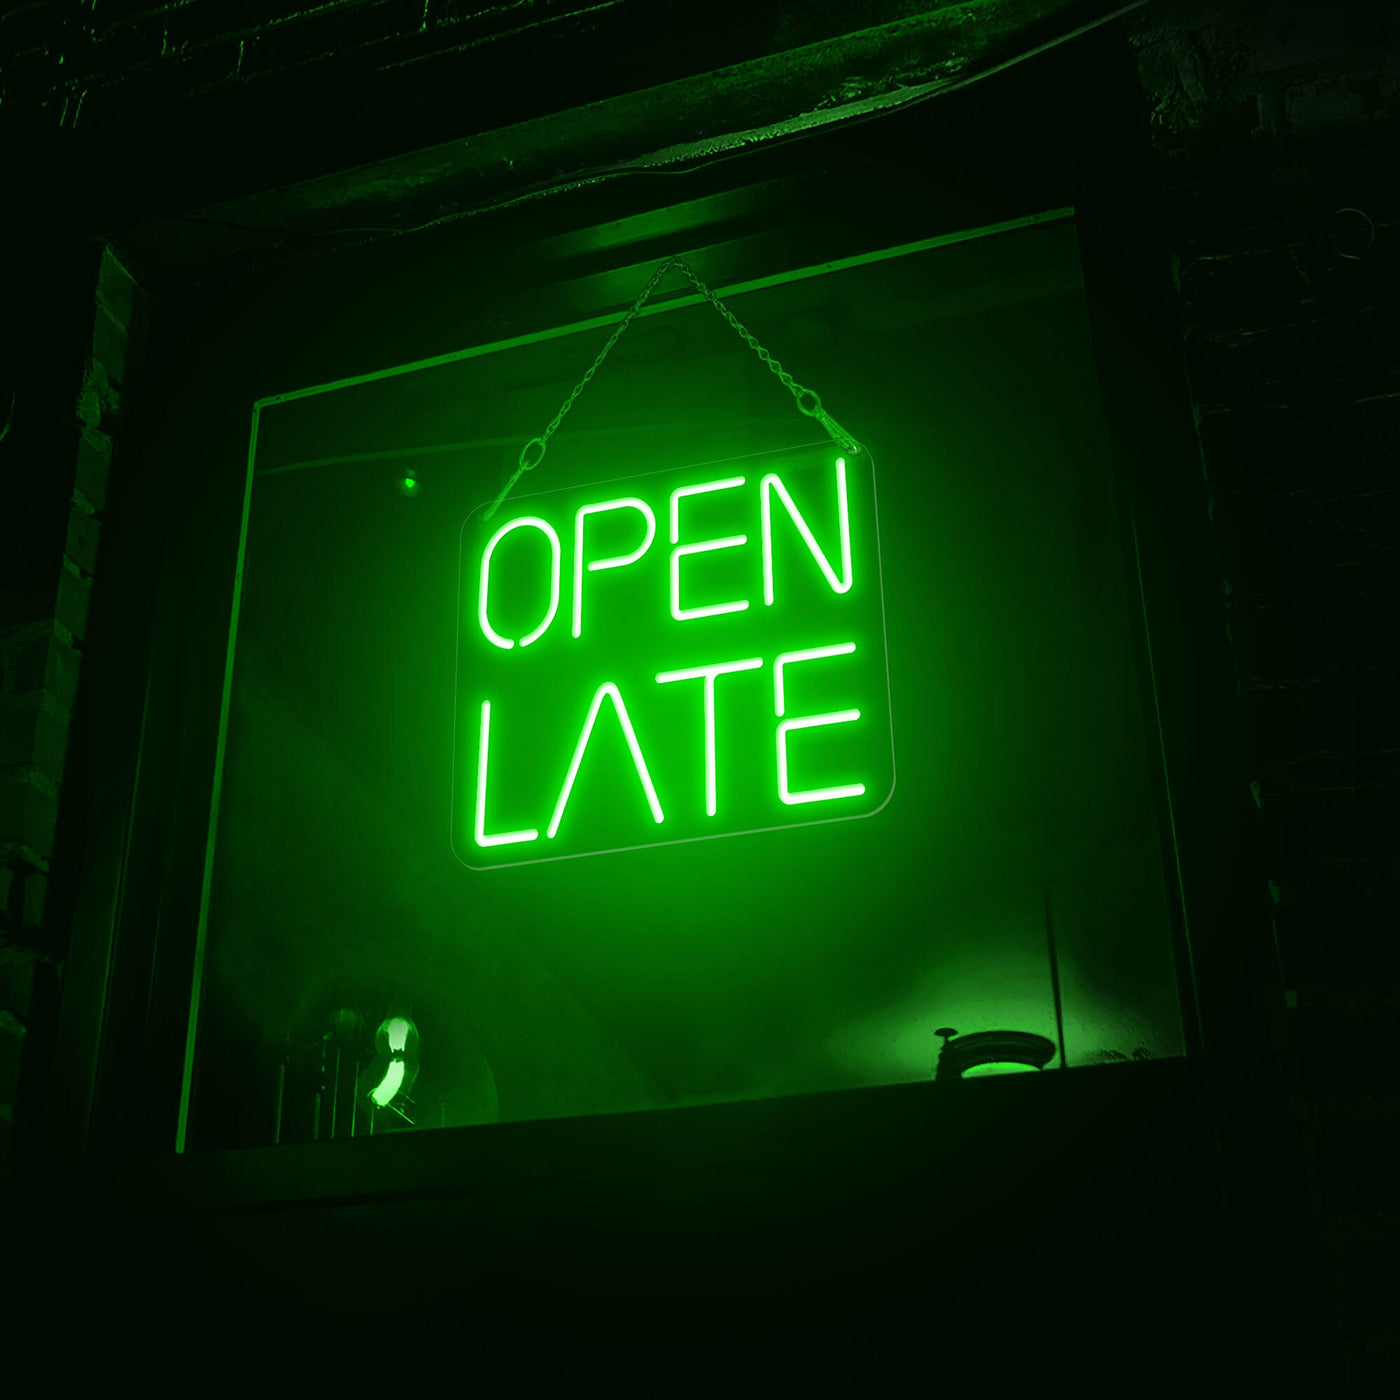 Open Late Neon Sign Business Neon Led Light green